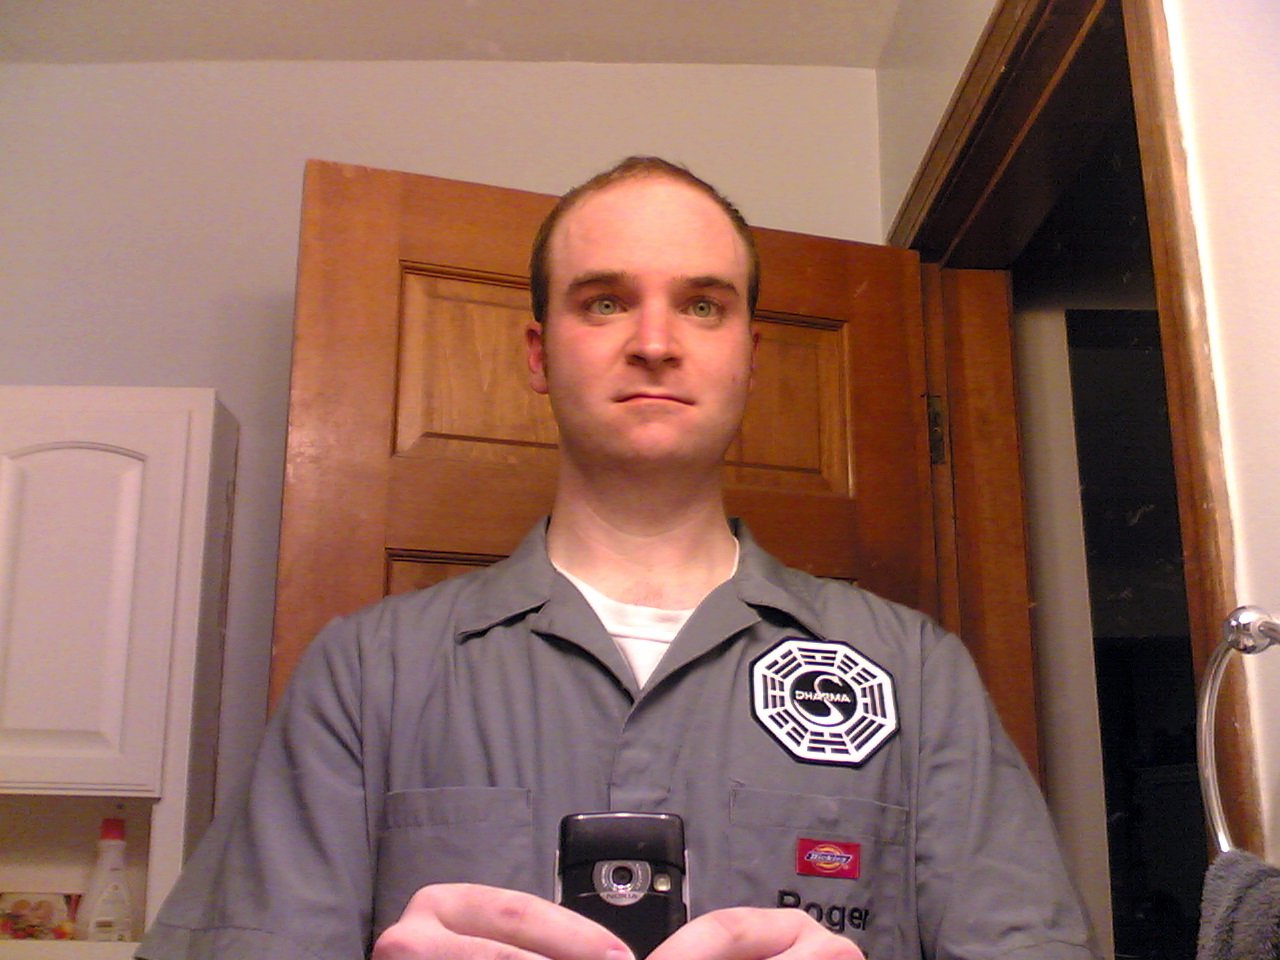 a man holding a smart phone wearing a frisbee badge